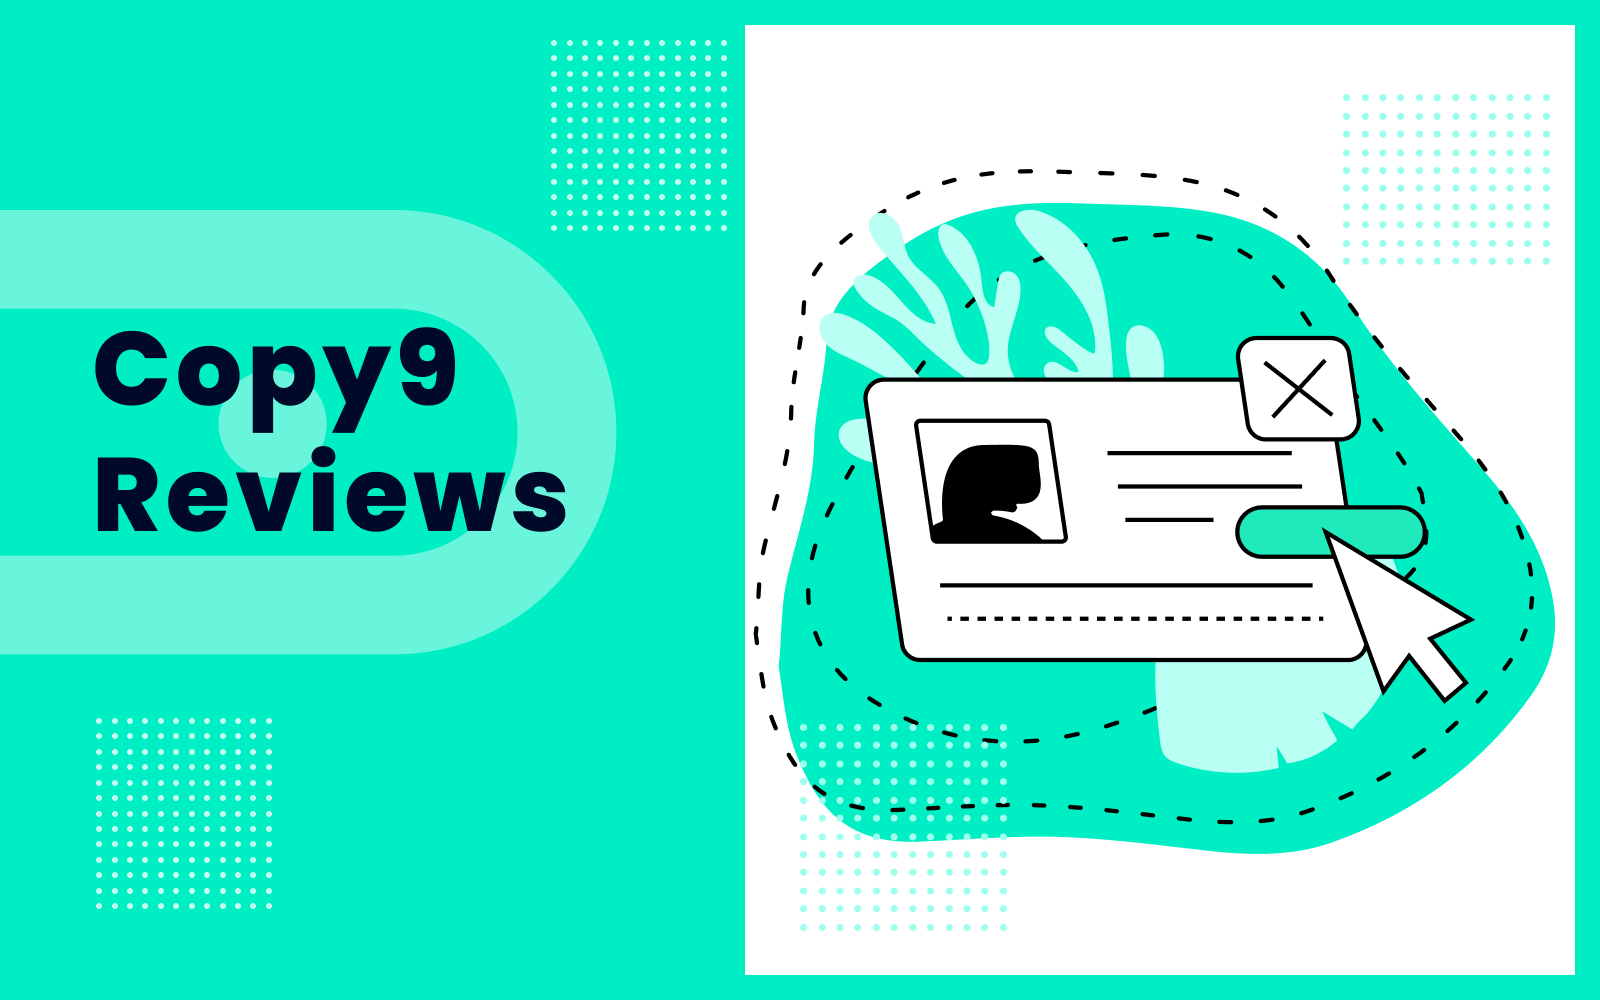 Copy9 Reviews 2023: Will the App Resume Its Work?